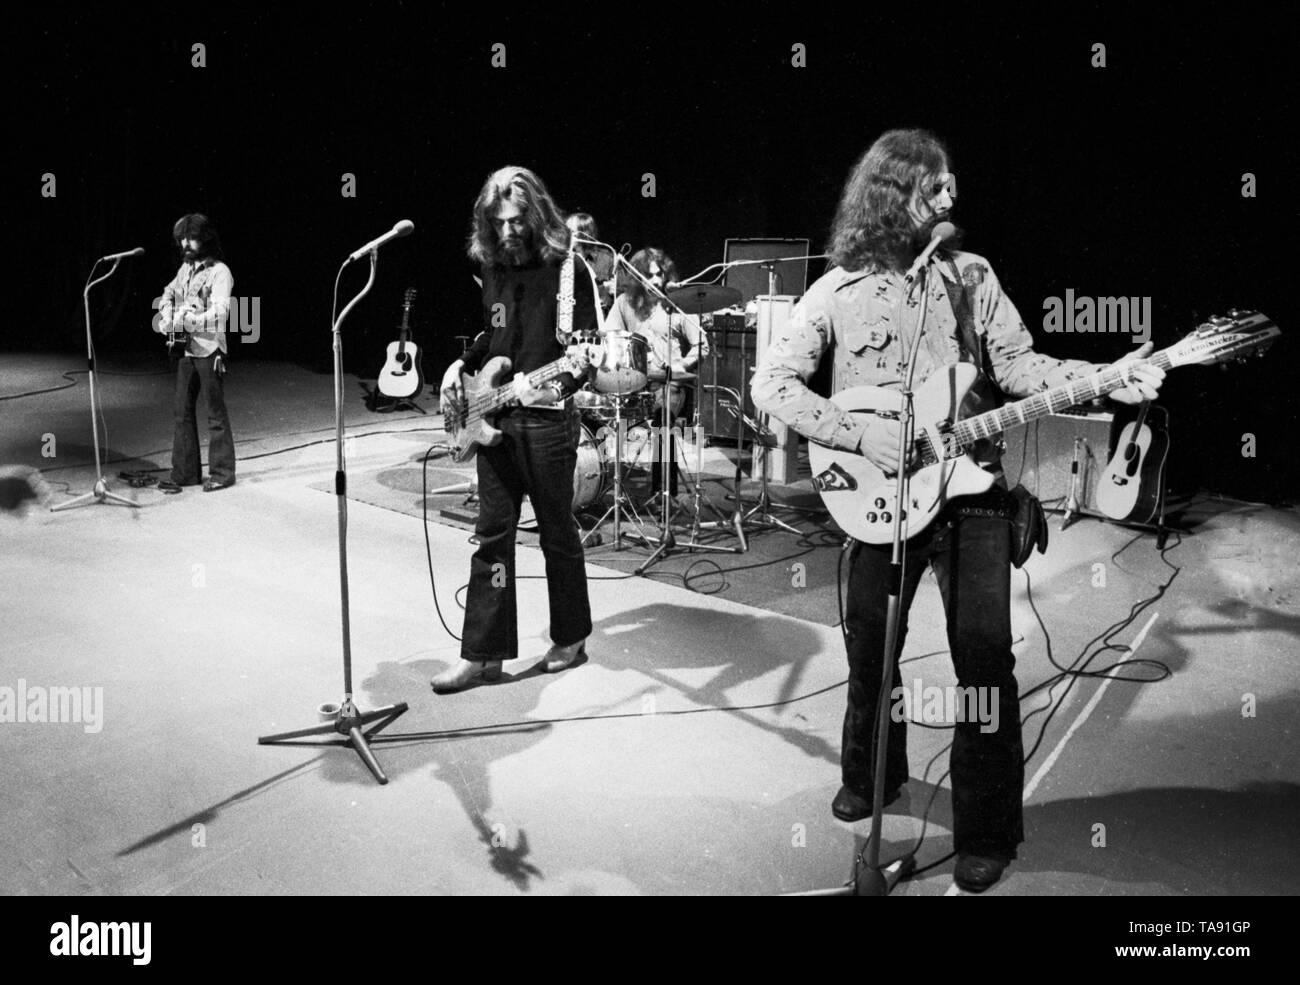 The Byrds perform live on stage in London in 1970. L-R Clarence White,  Skip Battin, Gene Parsons, Roger McGuinn (Photo by Gijsbert Hanekroot) Stock Photo